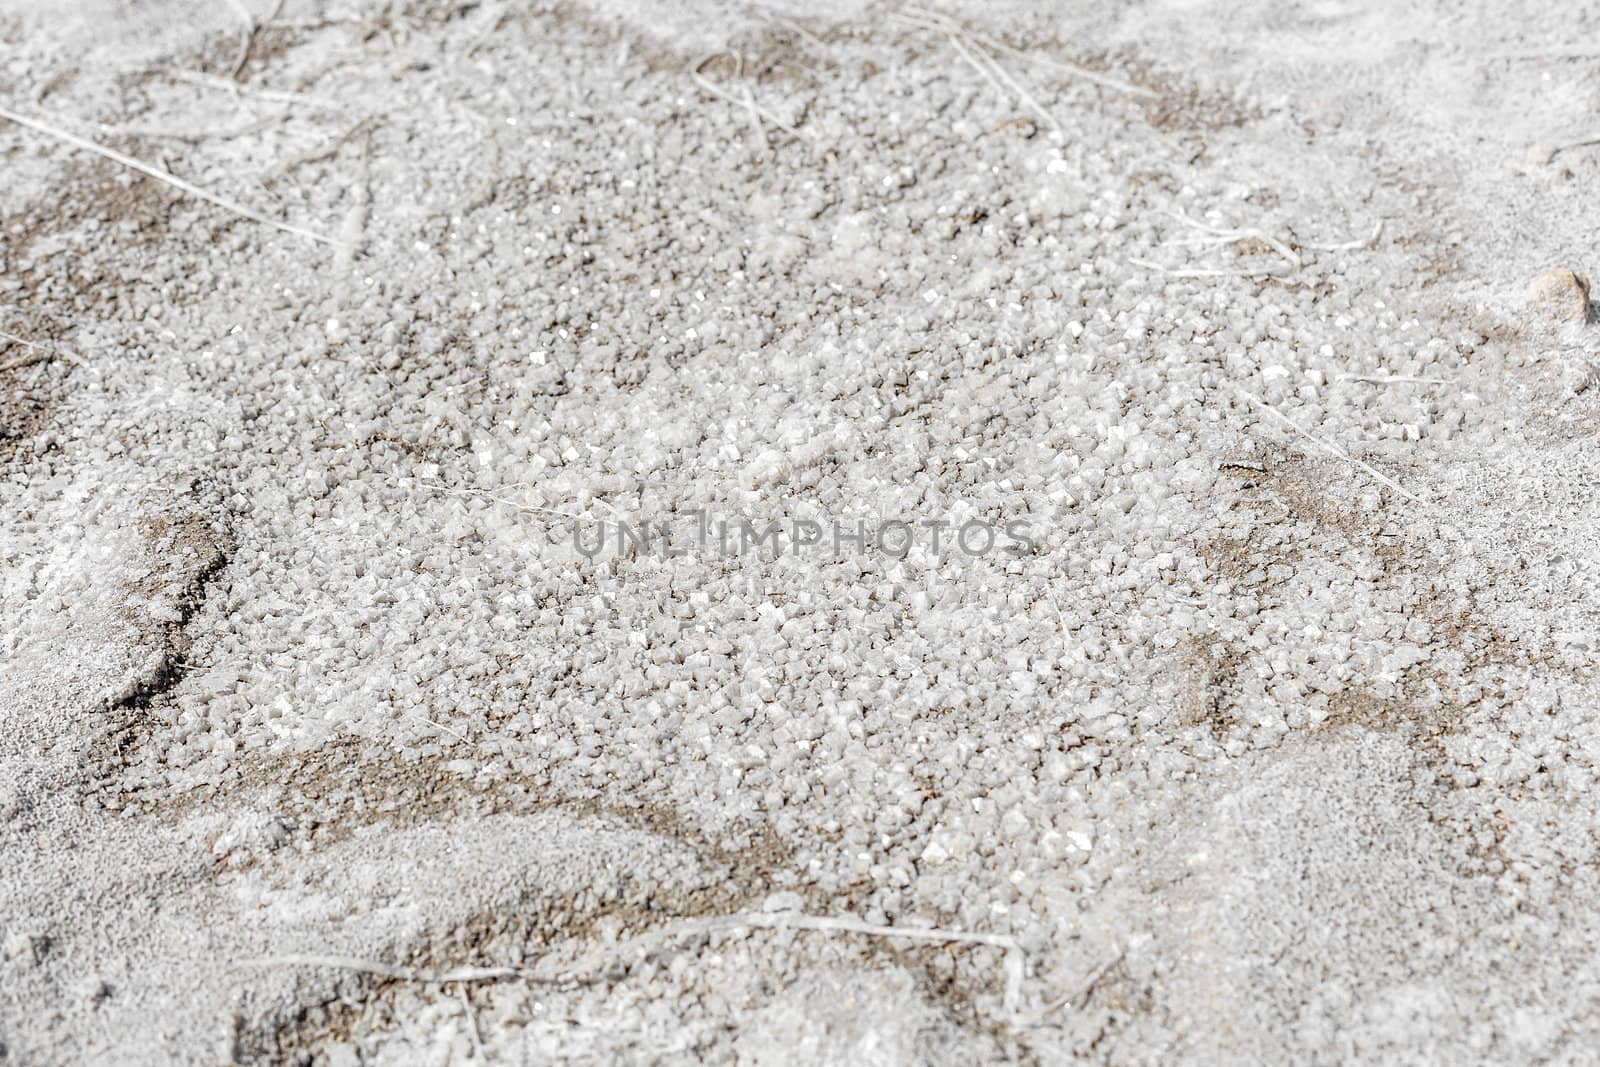 Salt crystals close-up commercial production